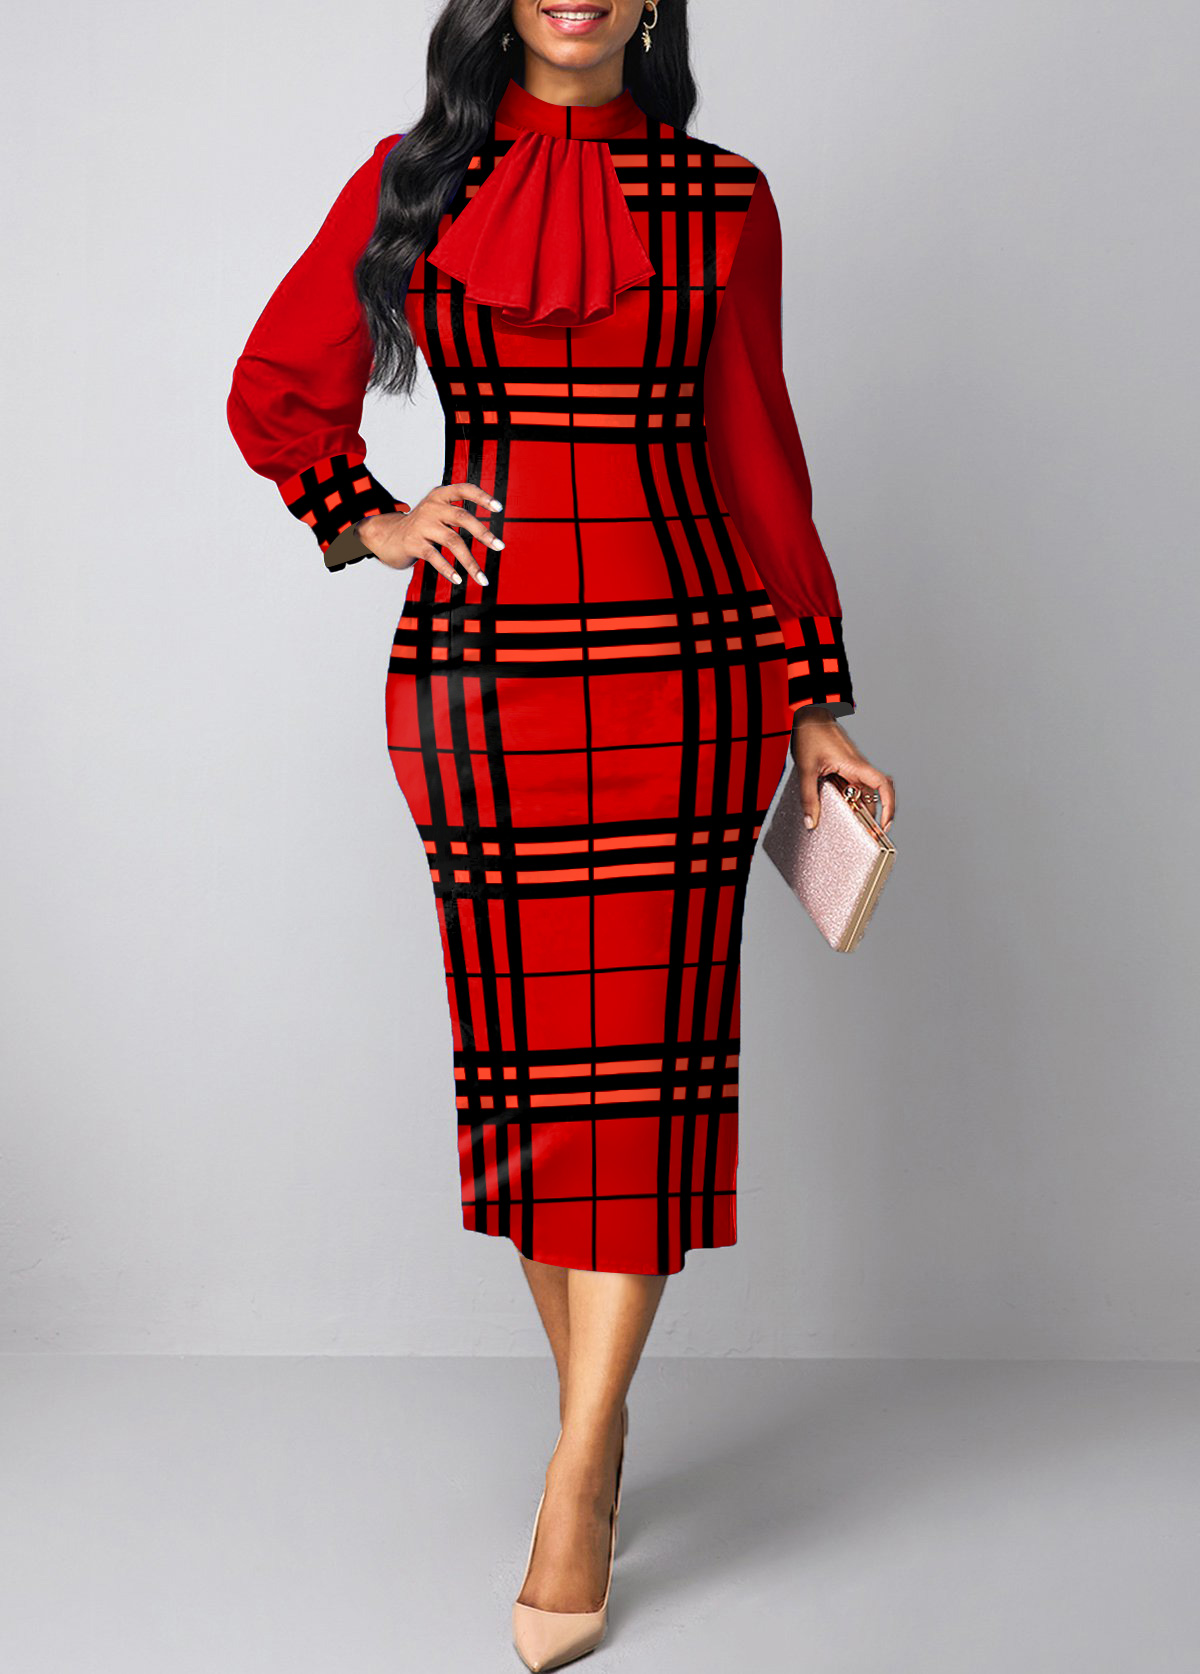 ROTITA Patchwork Plaid Red Two Piece Suit Dress